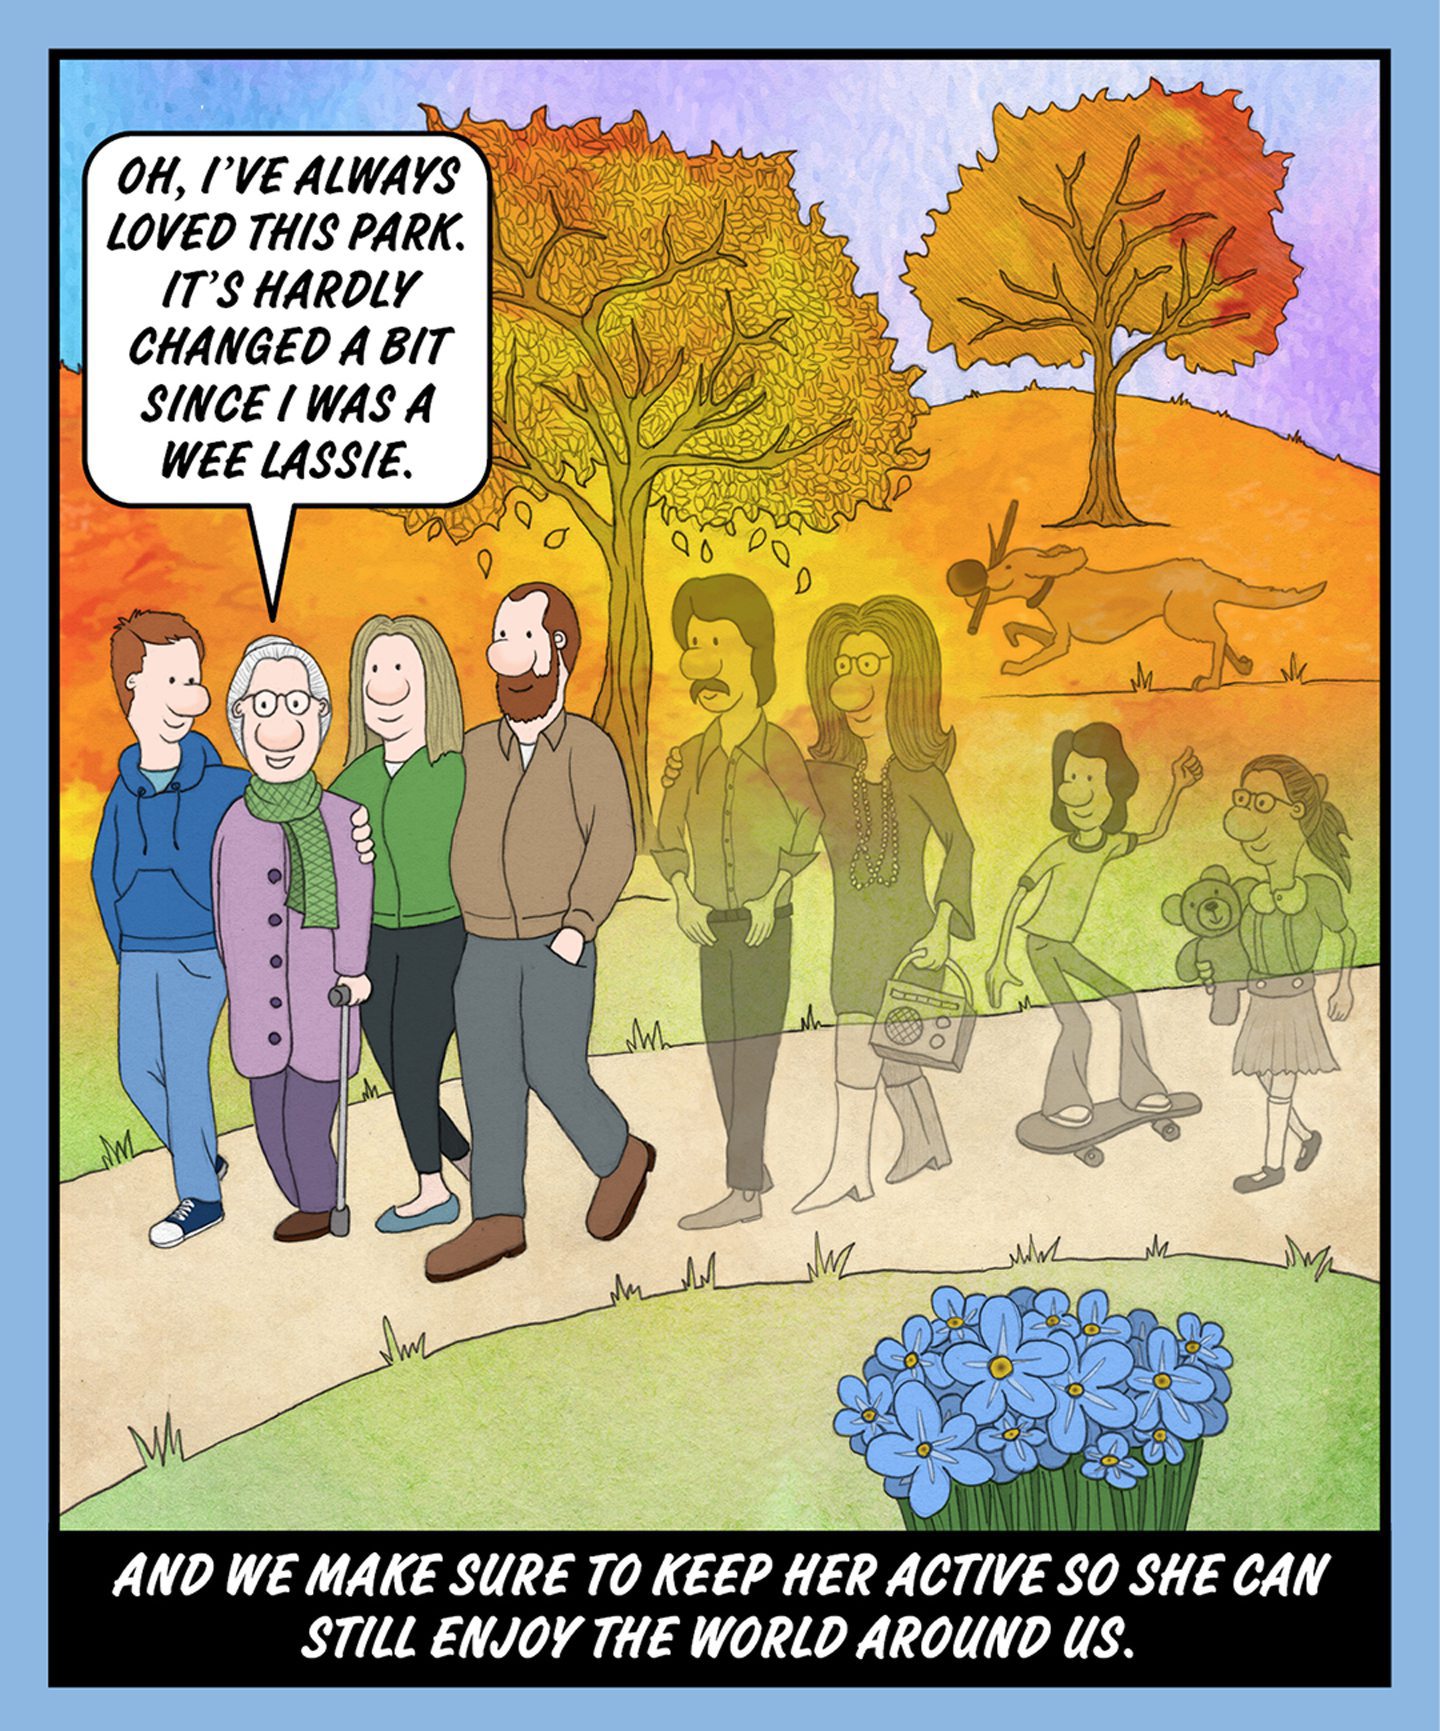 A comic illustration of a granny walking through the park with her family and younger versions of the people faded out beside them. The speech bubble from the granny reads: OH, I'VE ALWAYS LOVED THIS PARK. IT'S HARDLY CHANGED A BIT SINCE I WAS A WEE LASSIE.

The text below the image reads: AND WE MAKE SURE TO KEEP HER ACTIVE SO SHE CAN STILL TAKE ENJOY THE WORLD AROUND US.